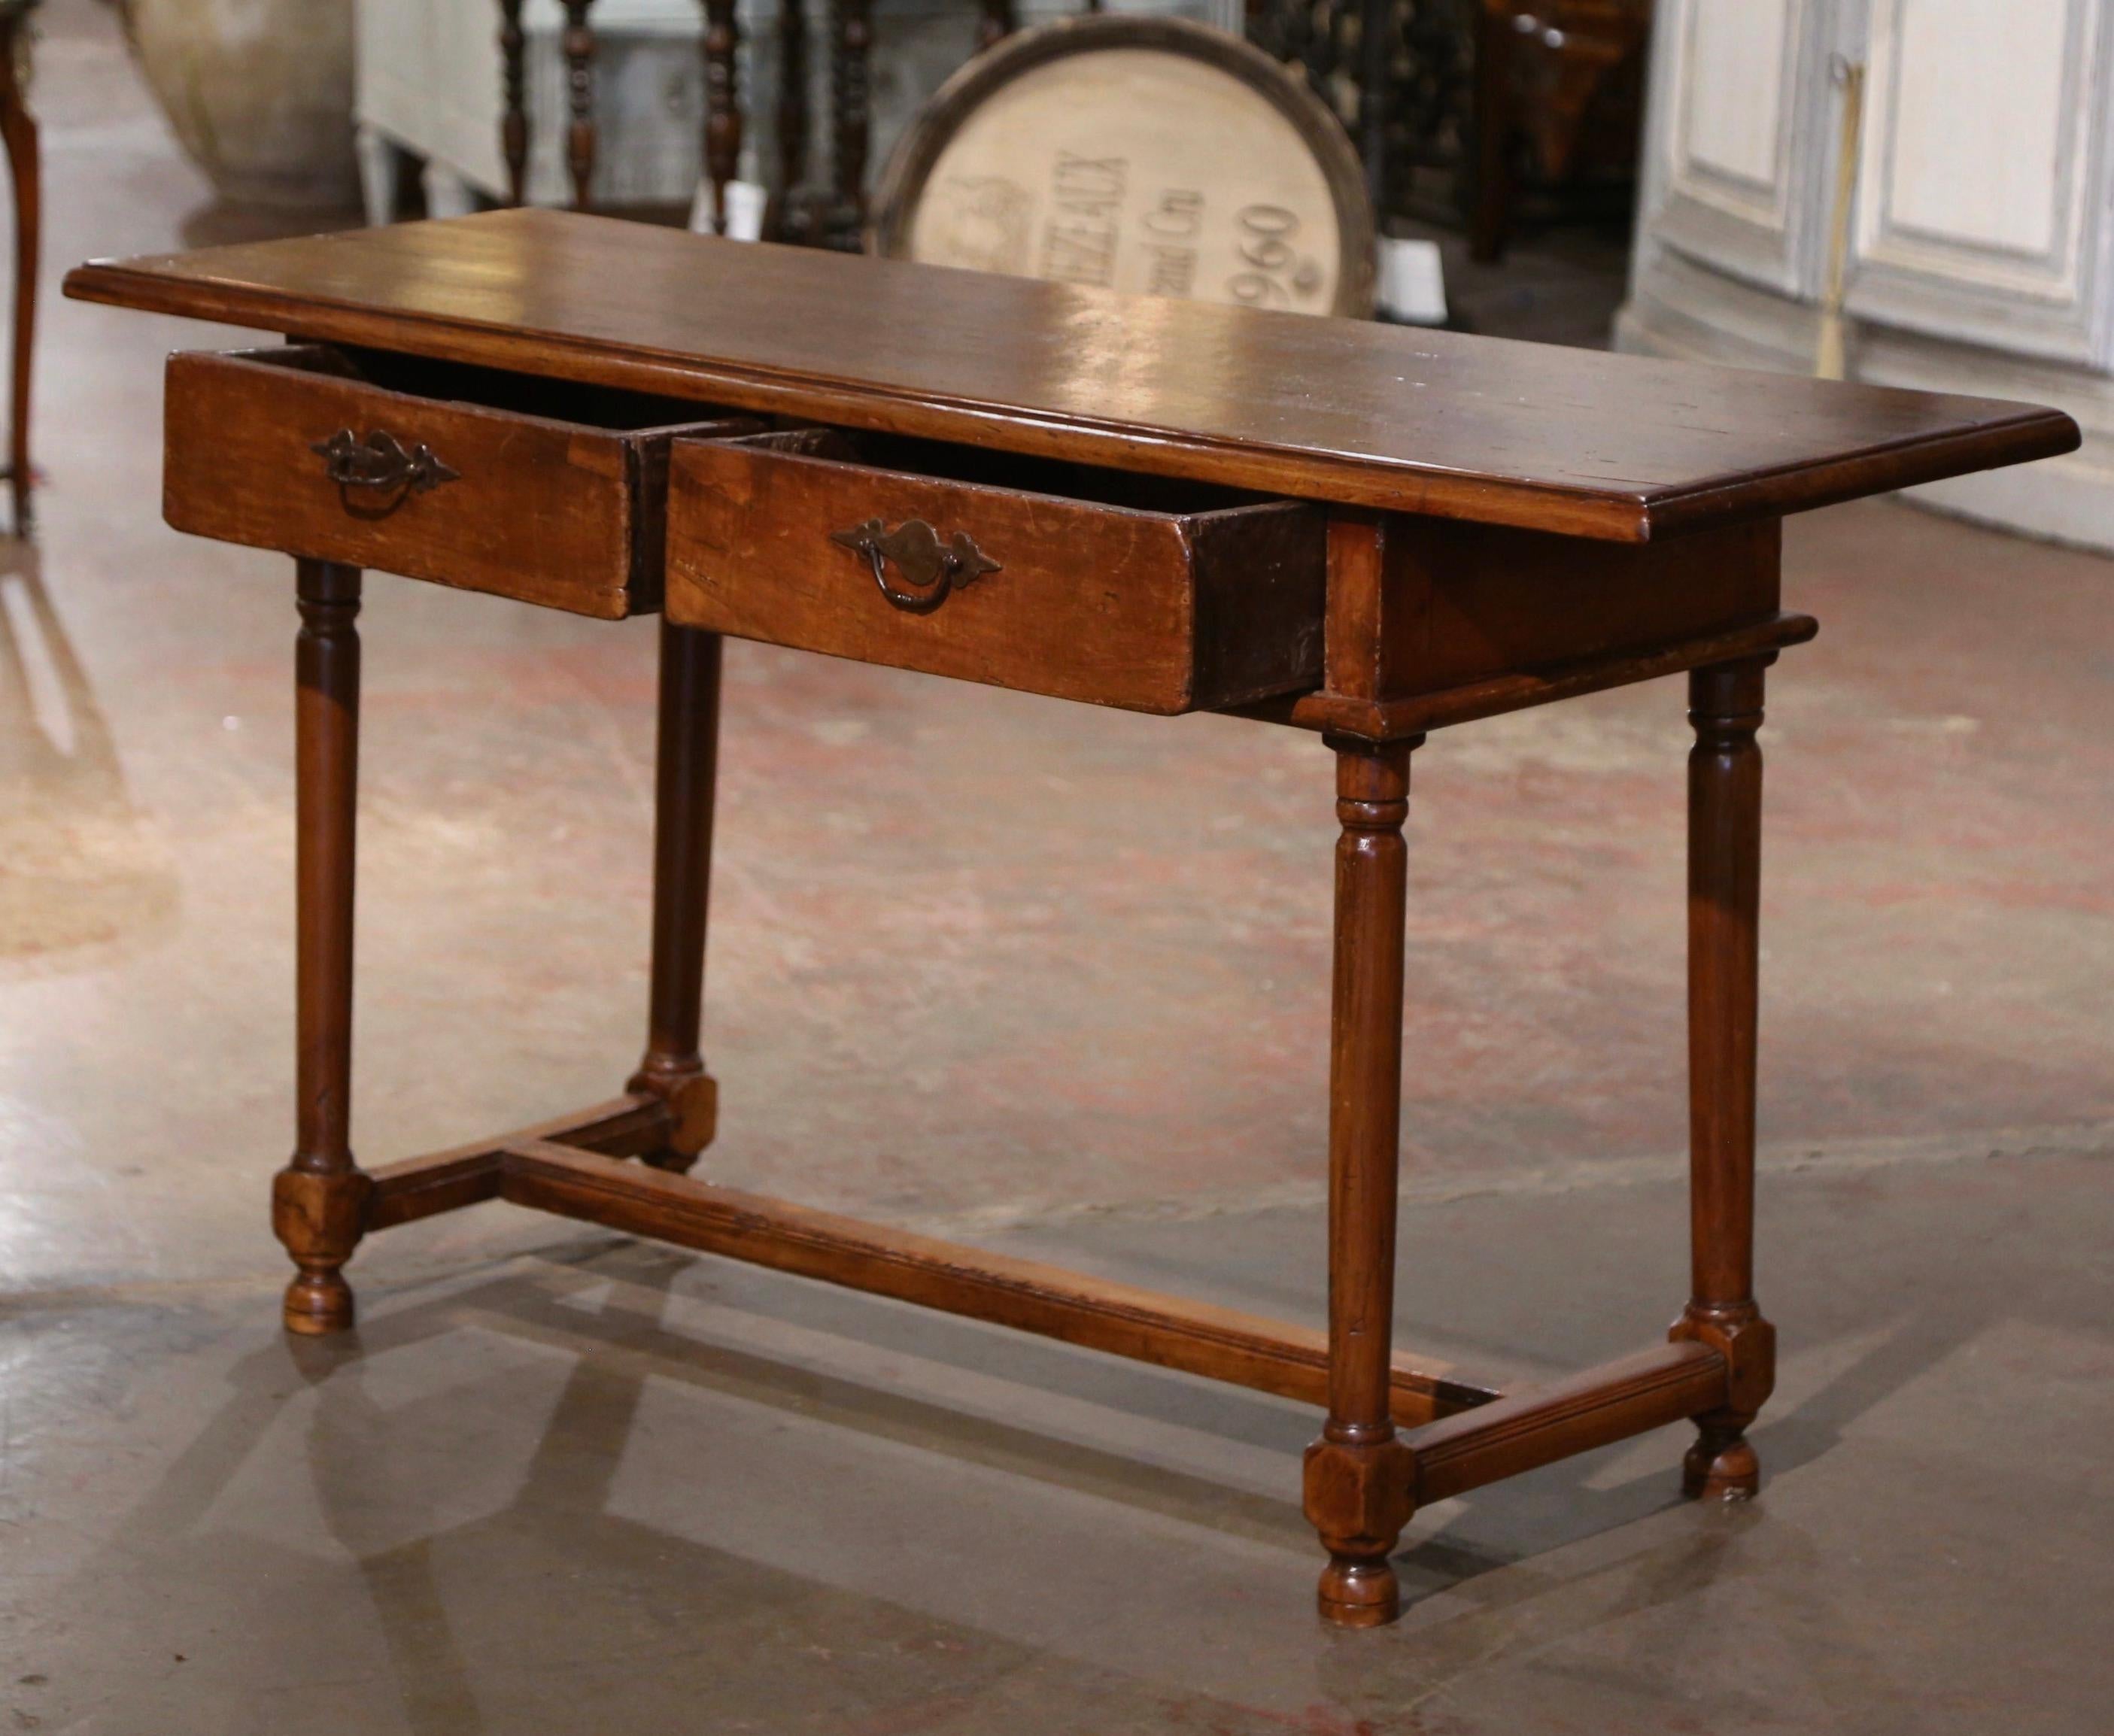 Mid-19th Century French Empire Walnut Console Table with Drawers For Sale 5